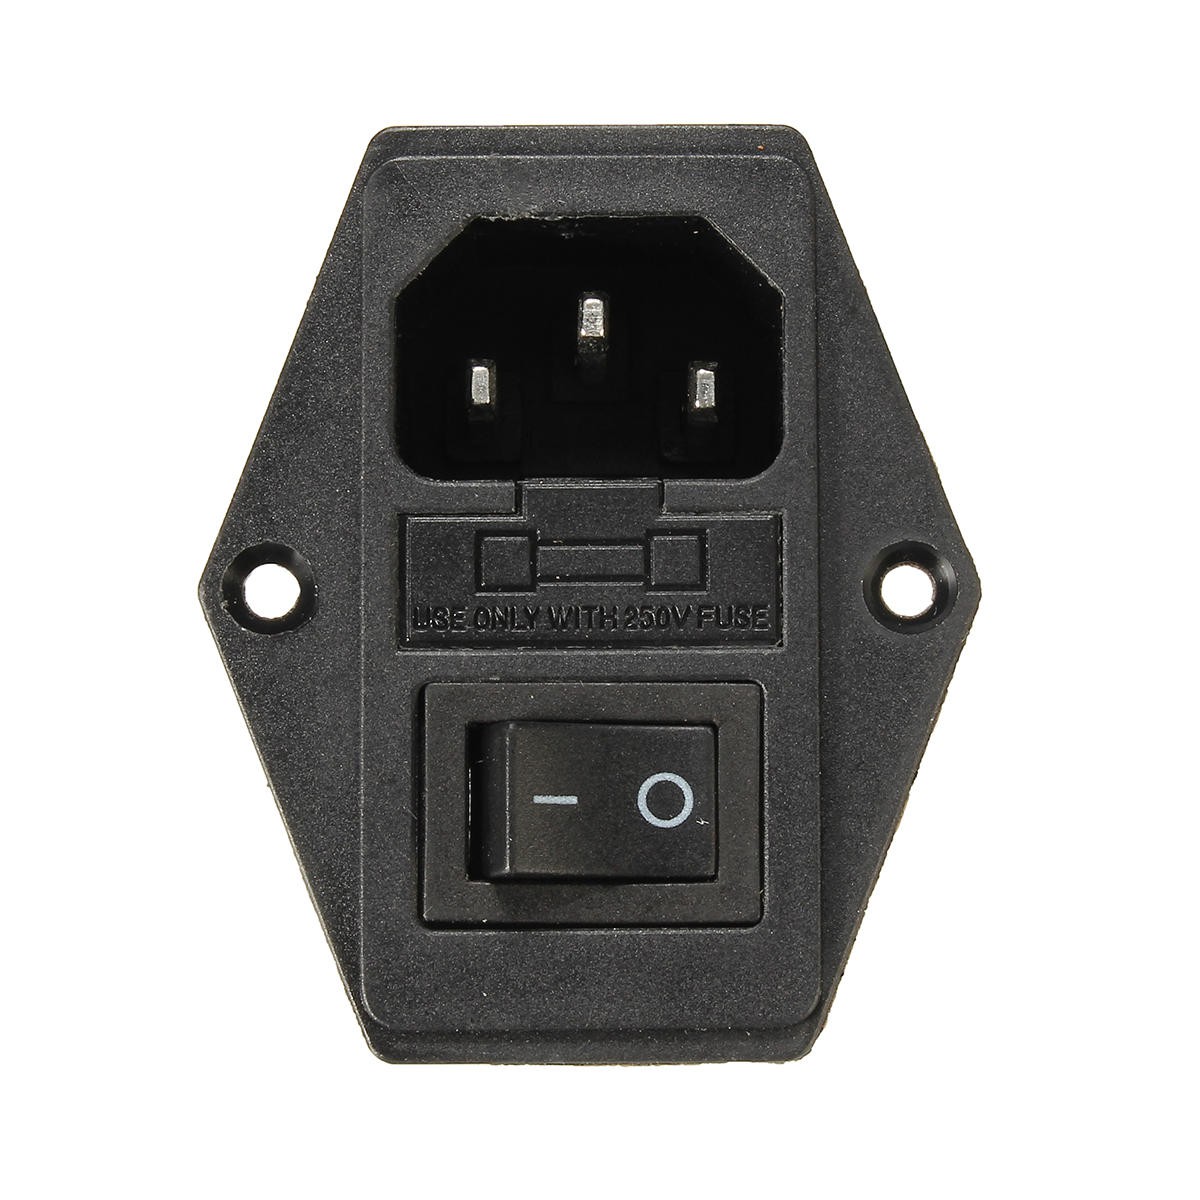 3Pin iec320 c14 inlet module plug fuse switch male power socket 10A 250V YL 